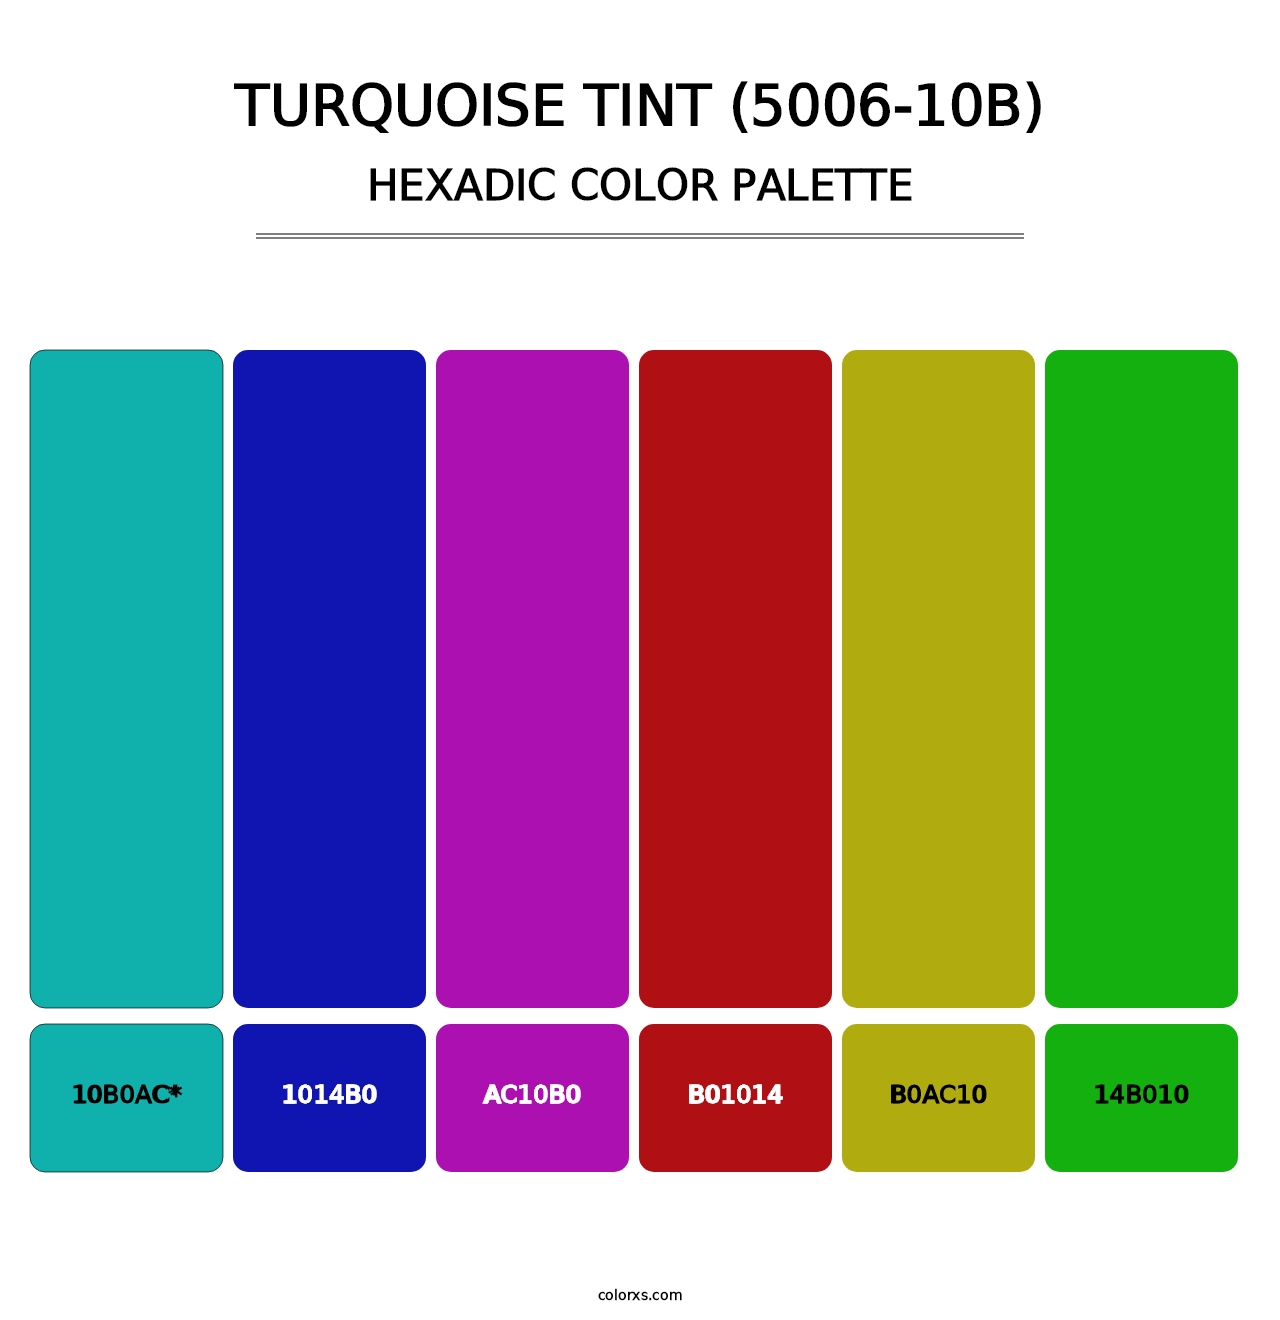 Turquoise Tint (5006-10B) - Hexadic Color Palette